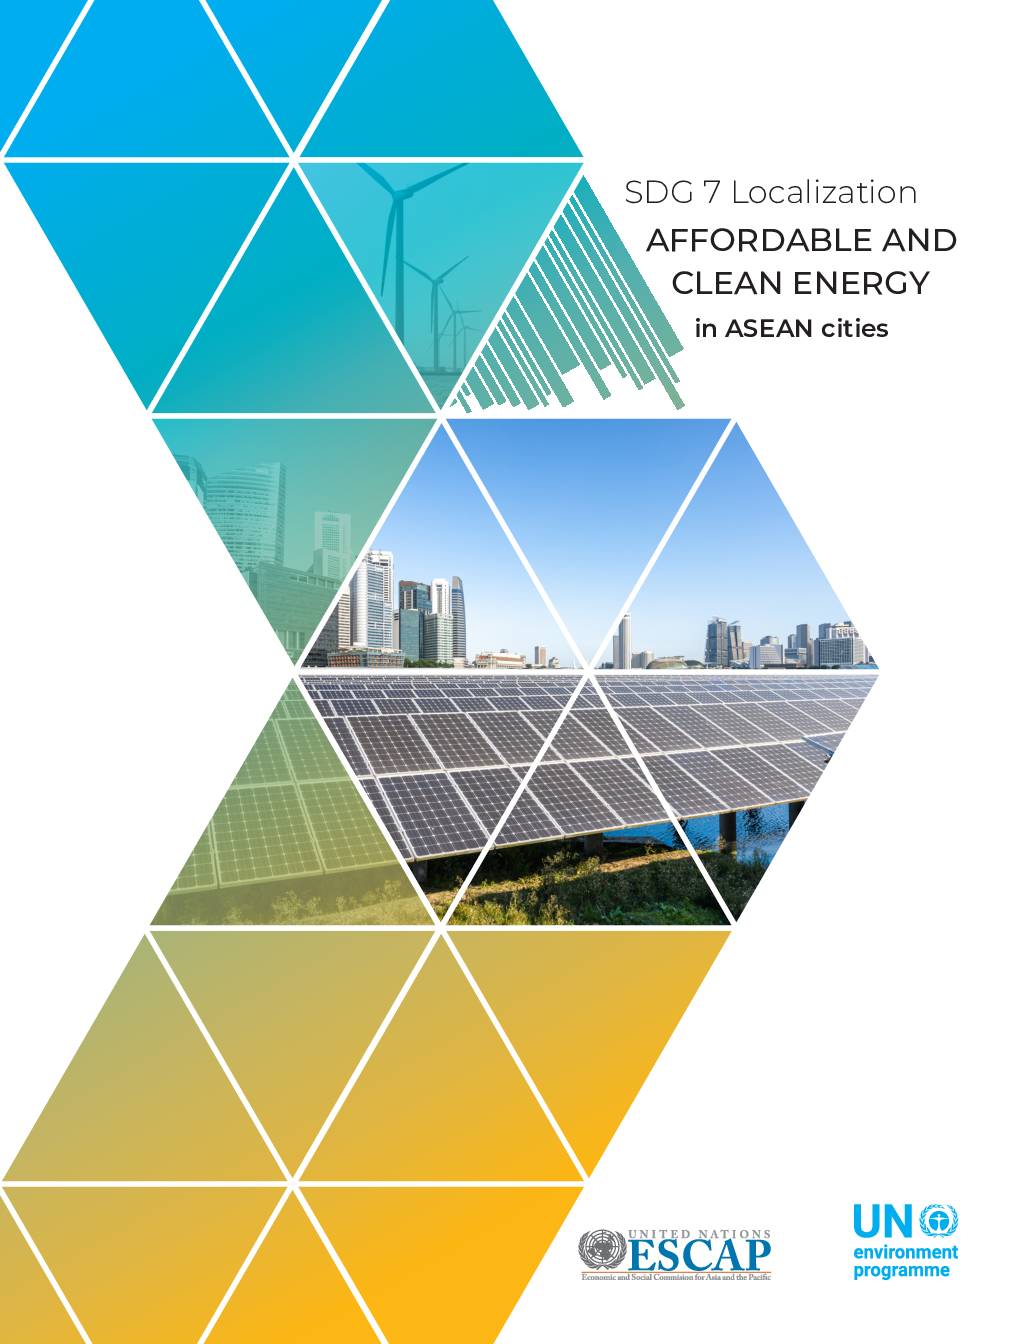 SDG 7 Localization Affordable and Clean Energy in ASEAN cities